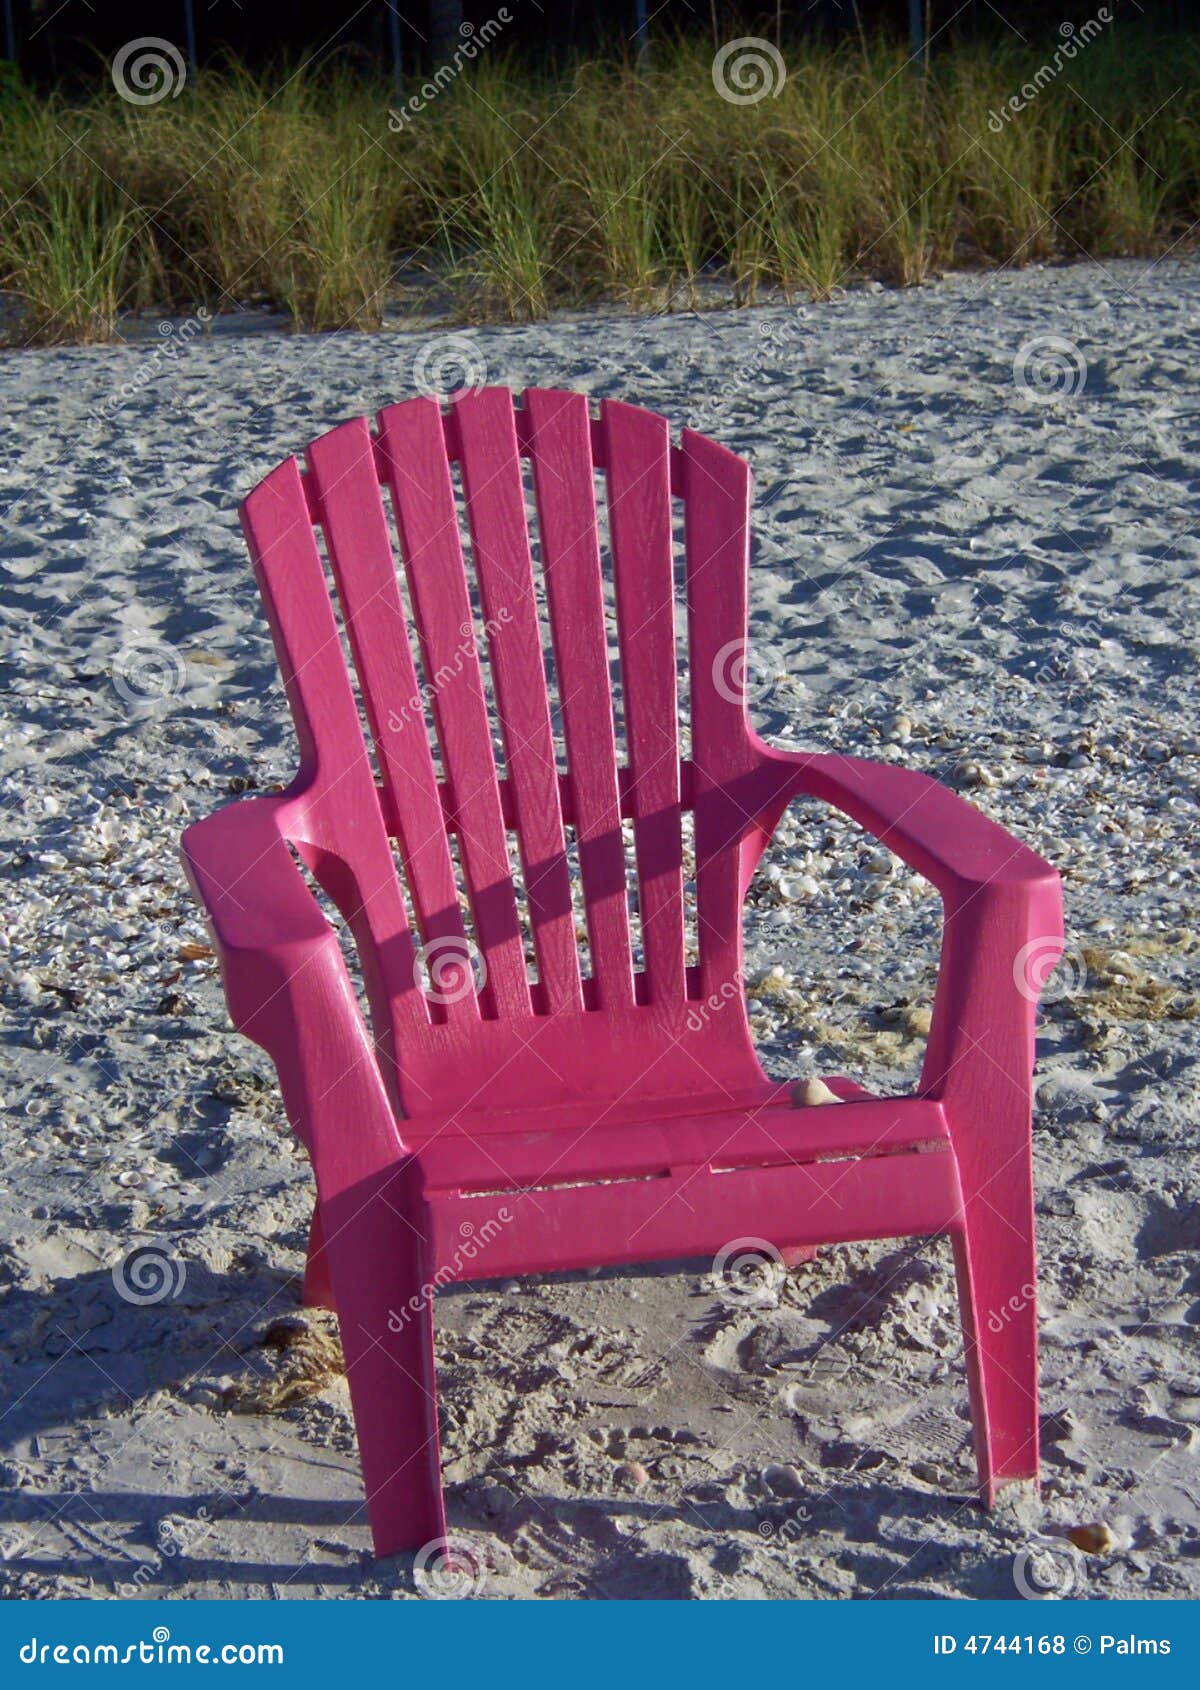 Pink chair on a beach stock photo. Image of colors, beach